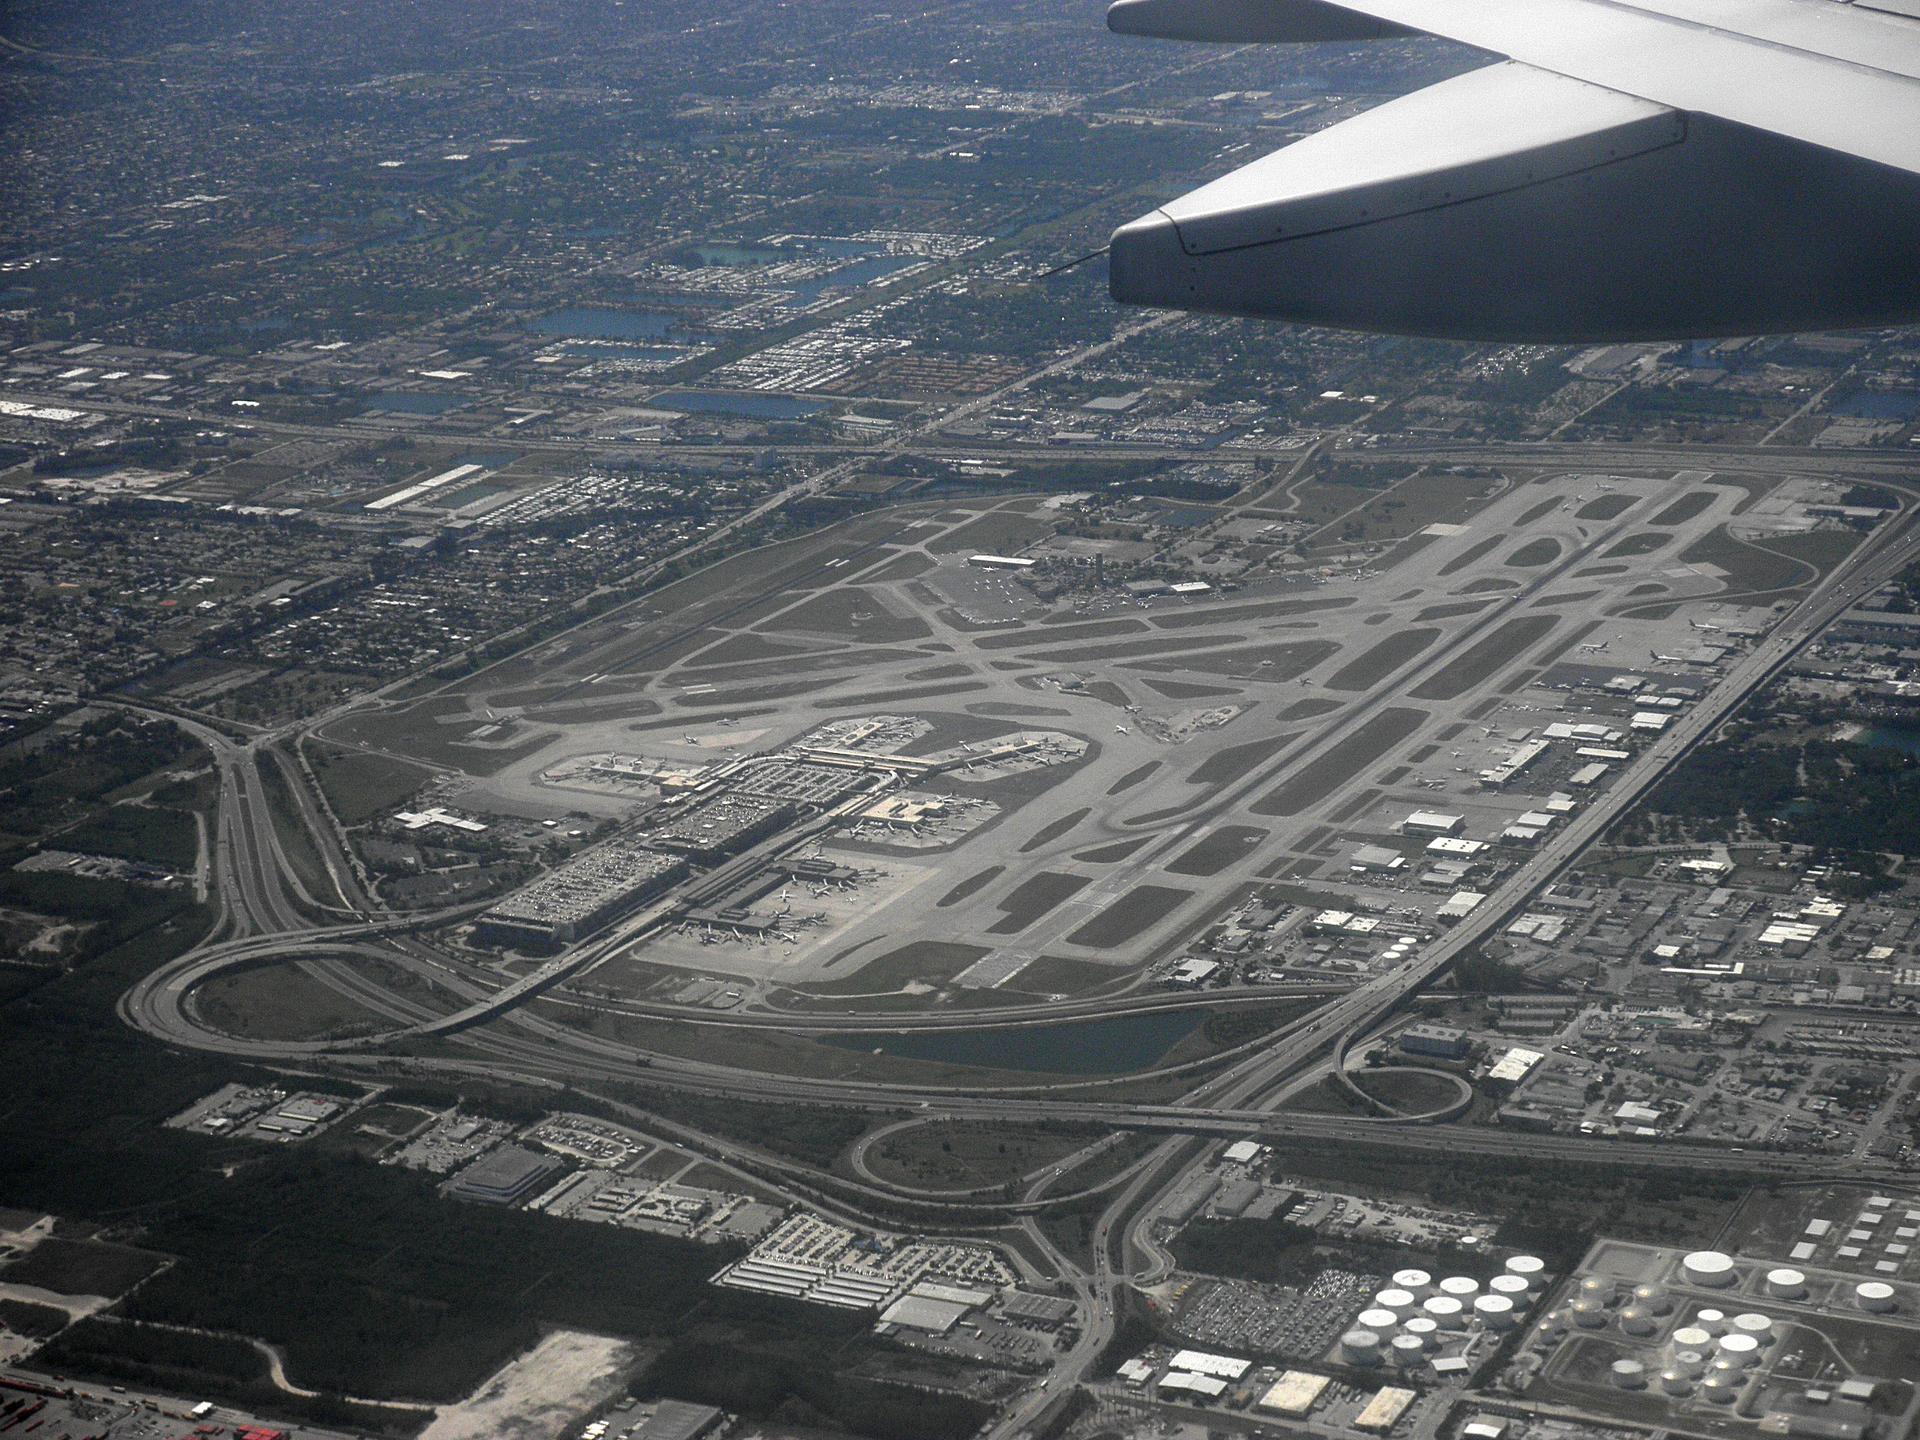 Fort Lauderdale-Hollywood International Airport seen from the air as a plane is about to land.